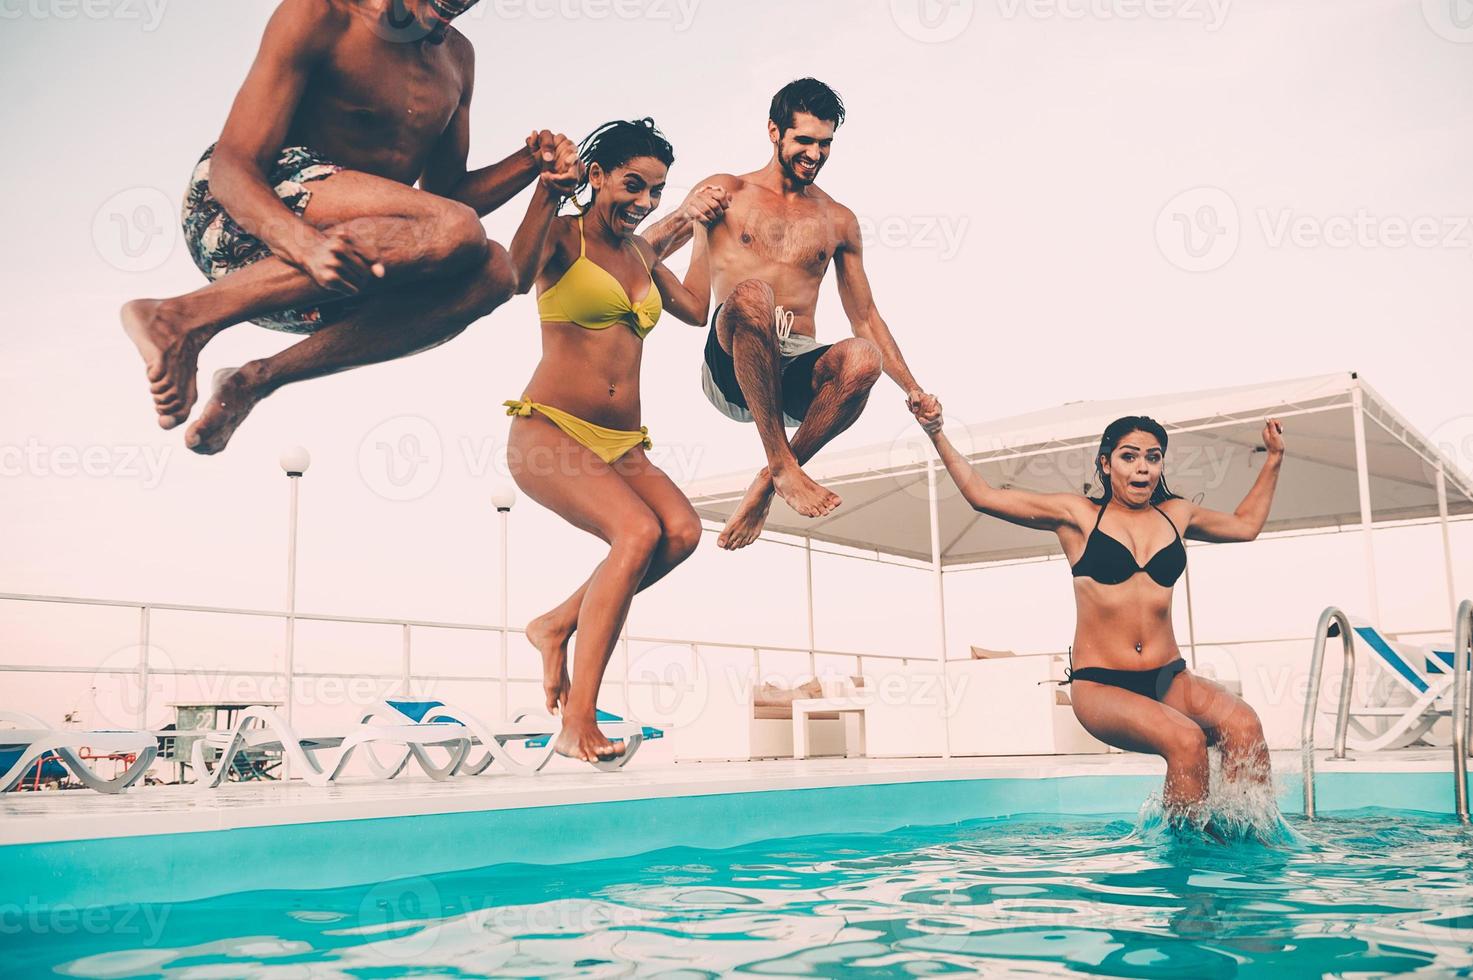 Enjoying pool party together. Group of beautiful young people looking happy while jumping into the swimming pool together photo